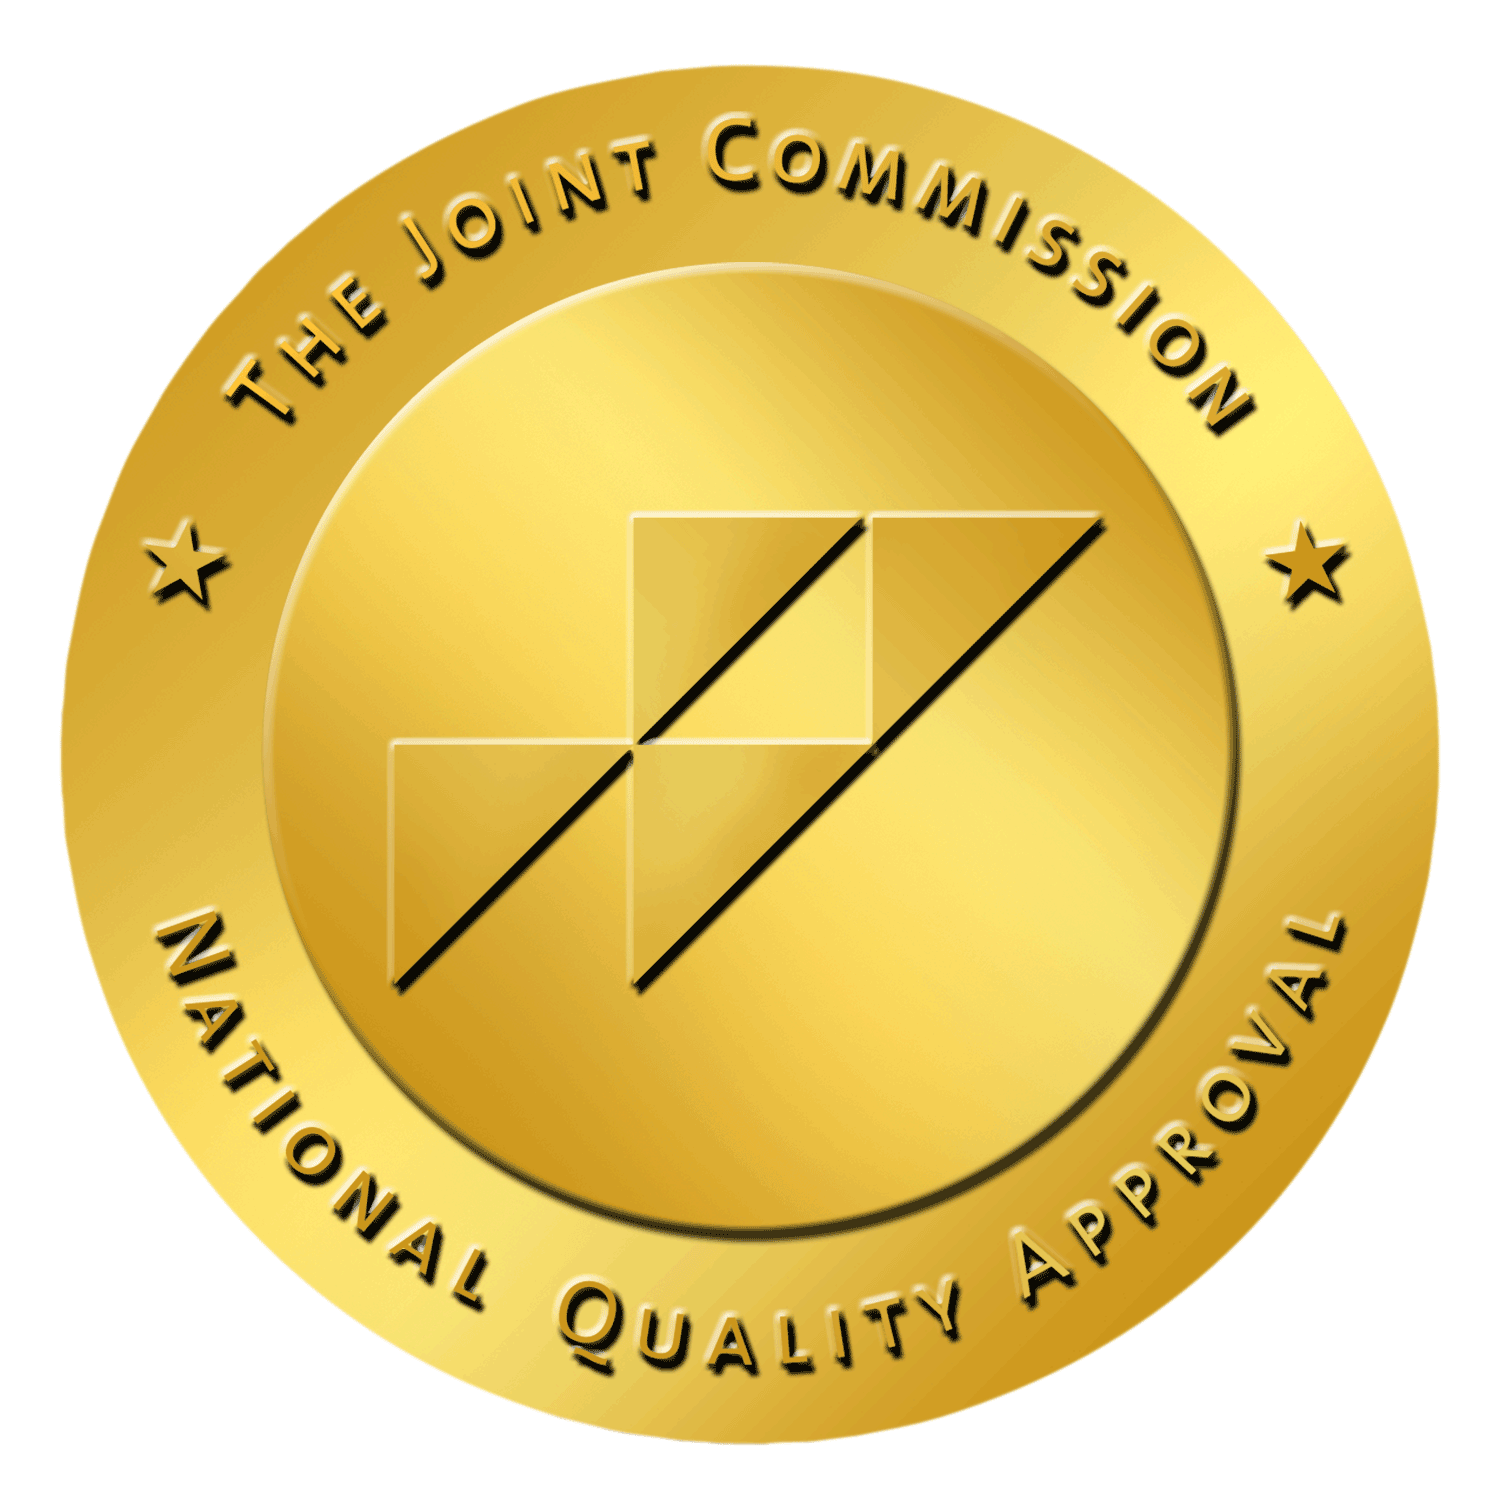 The Joint Commission Gold Seal Award